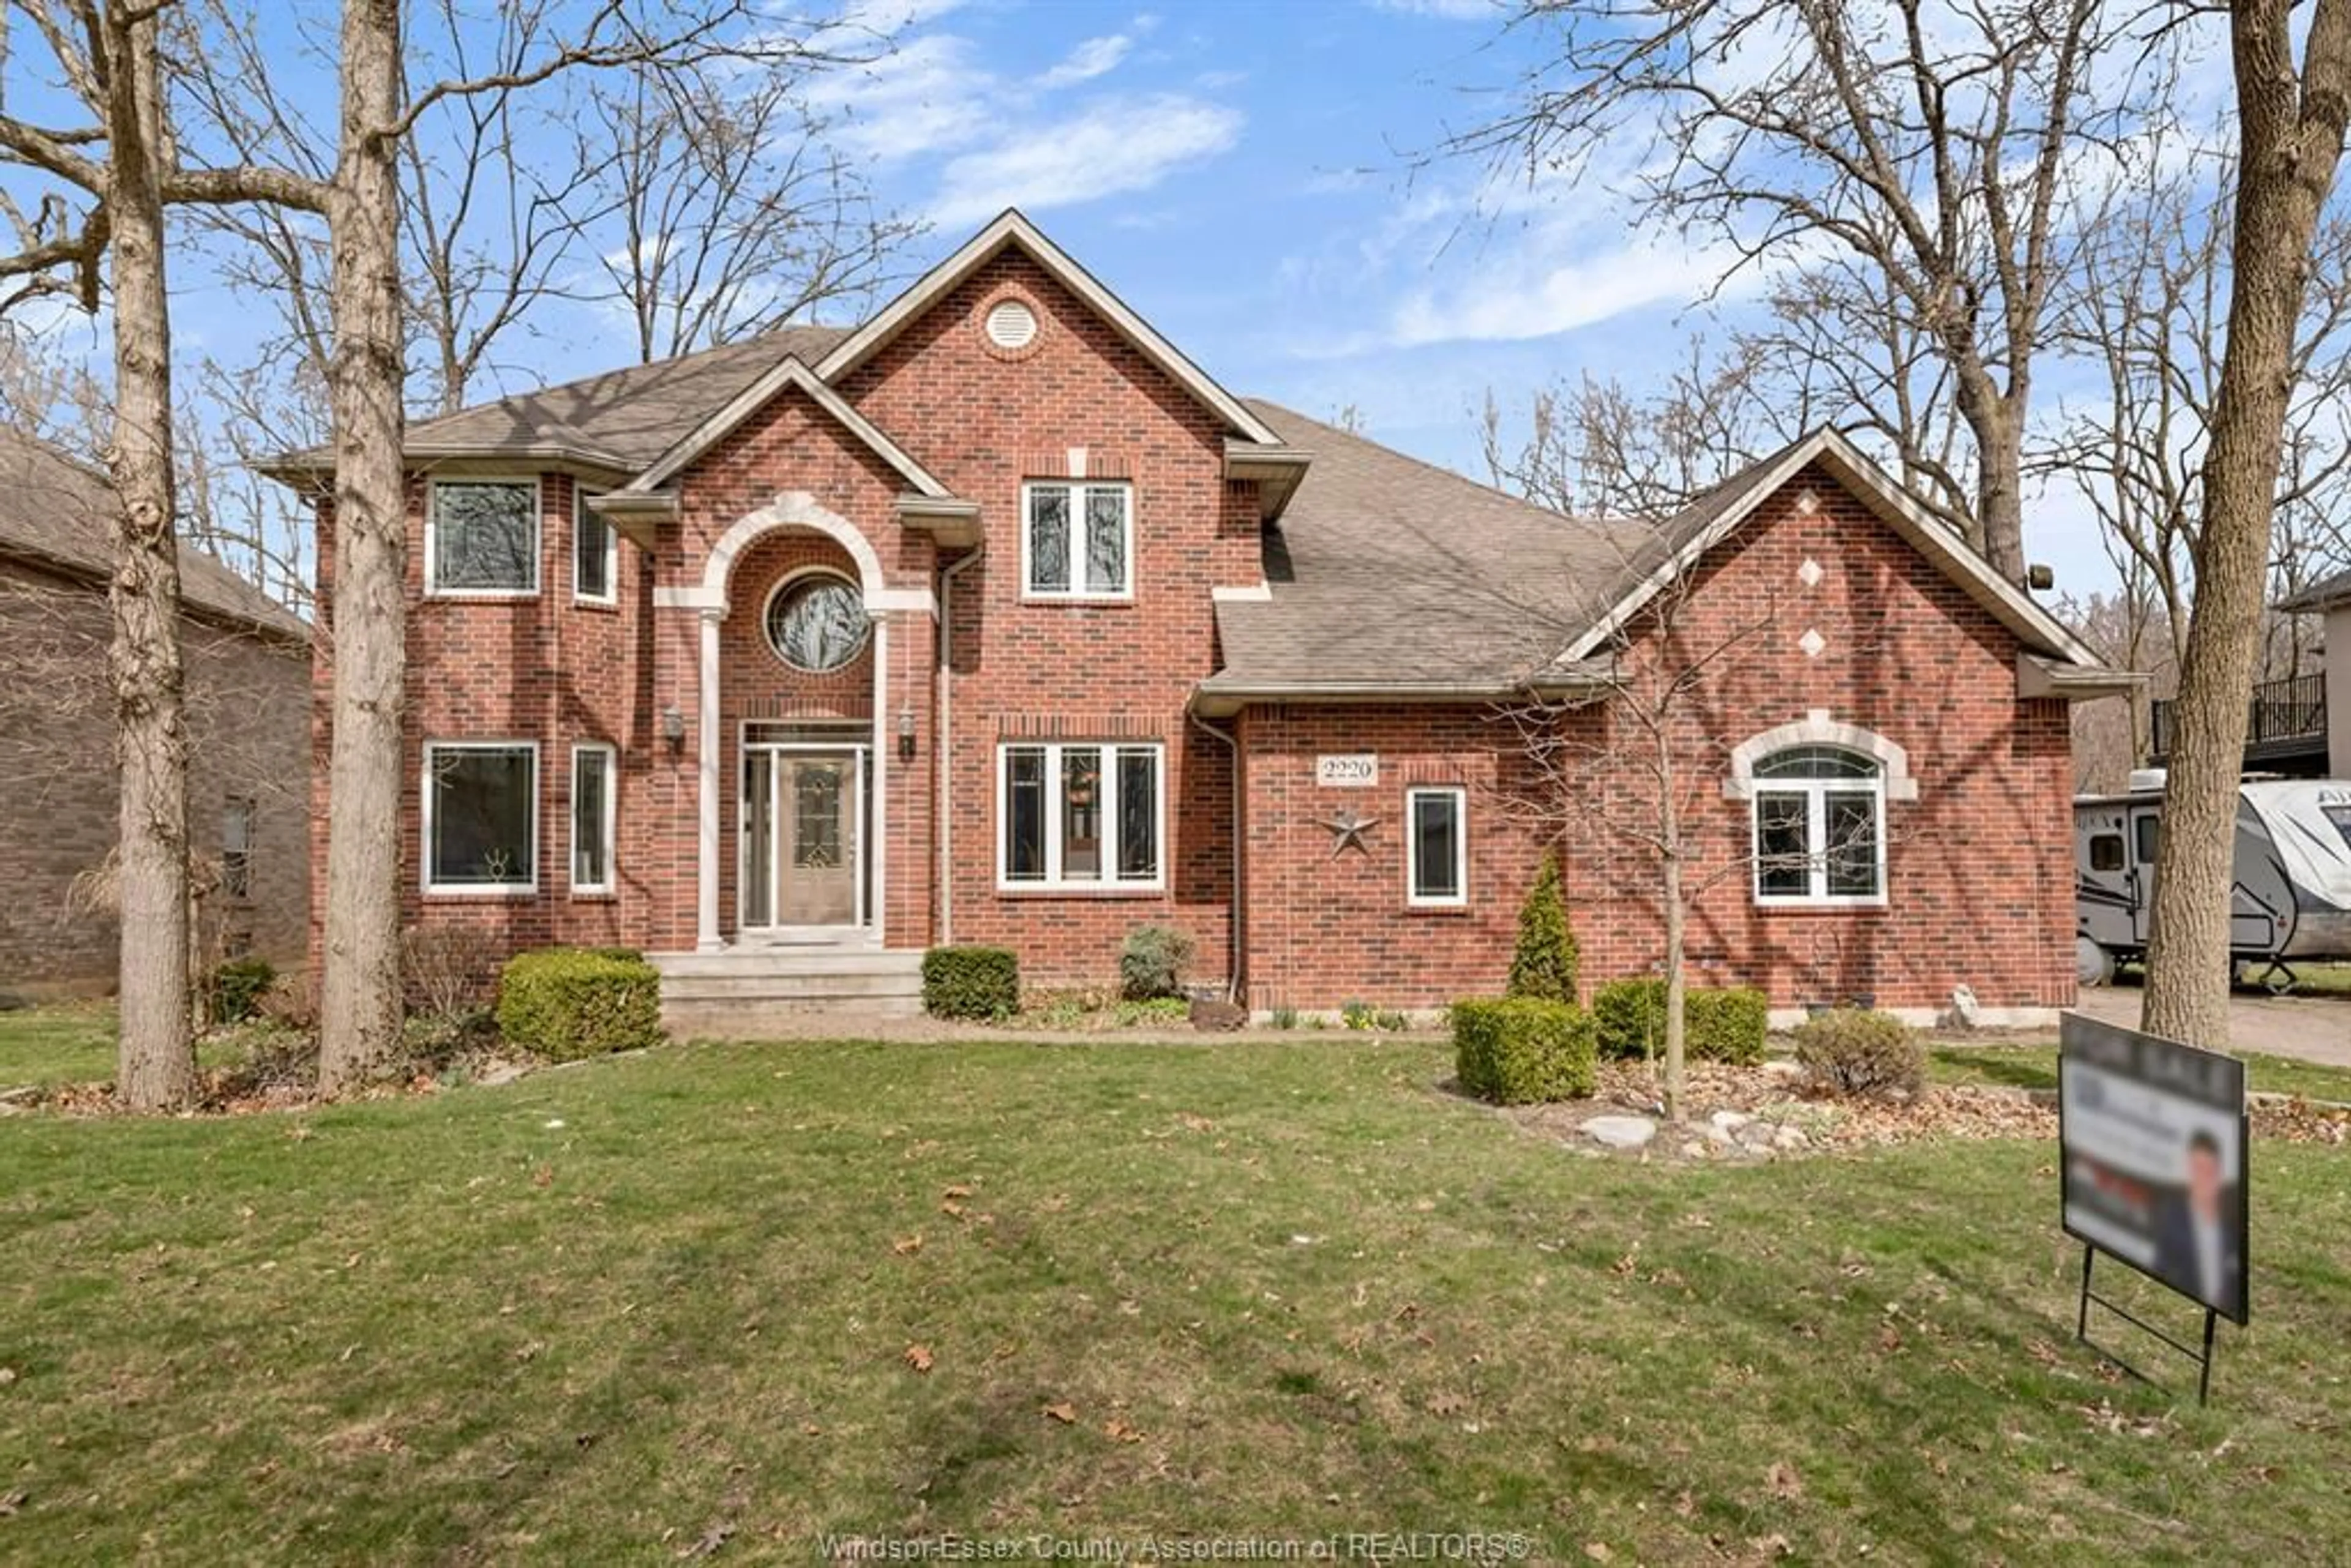 Home with brick exterior material for 2220 EDGEMORE, LaSalle Ontario N9V 3R3